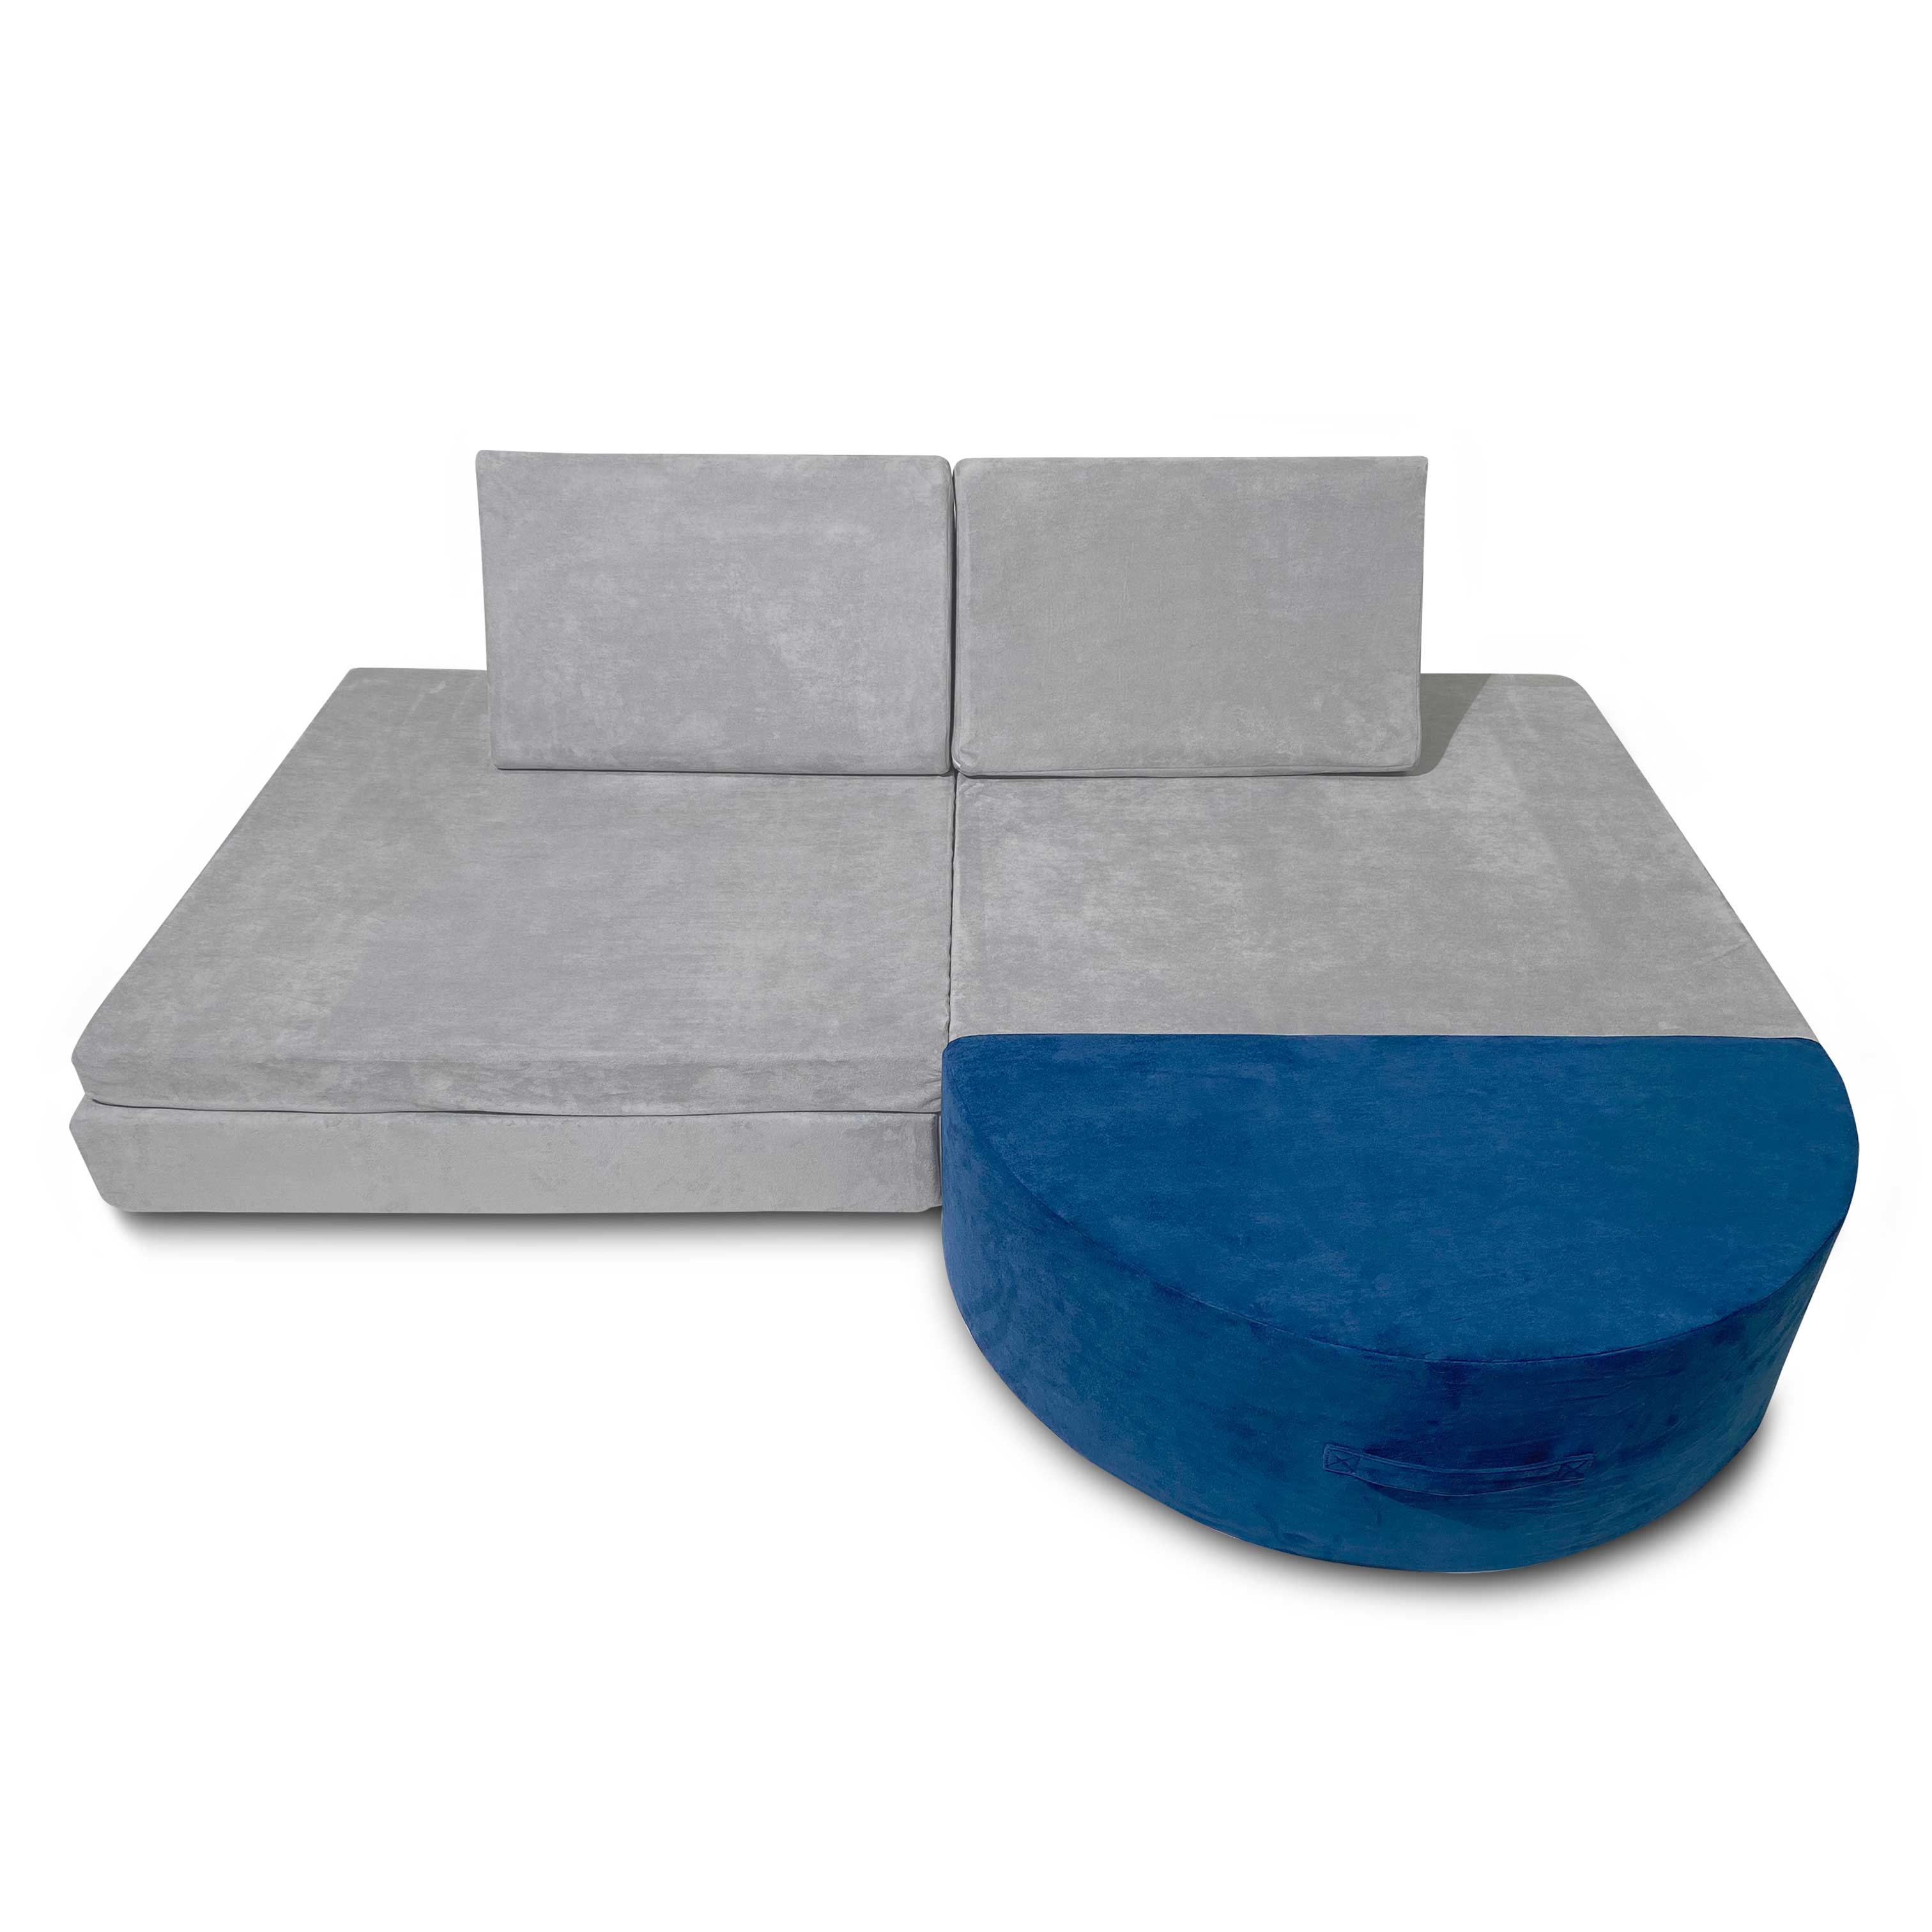 The Mod Blox modern grey sofa combined with a vibrant blue semi circle pillow on a clean white background.